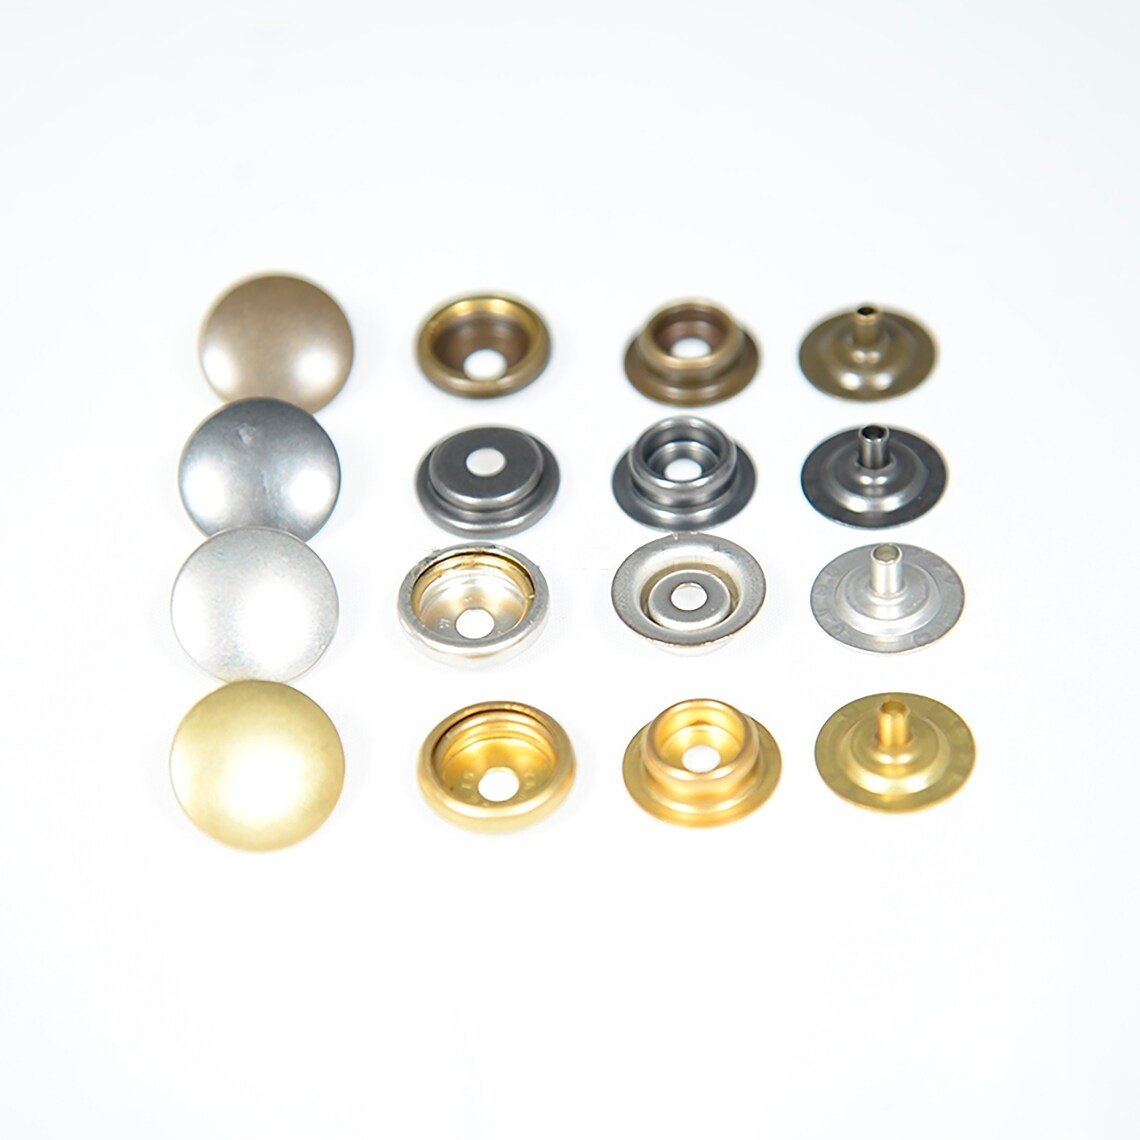 YKK SK75 Four Parts Ring-spring Button, Snap Button, Brass Button, Snaps, Metal Snap Snap ButtonsYKK